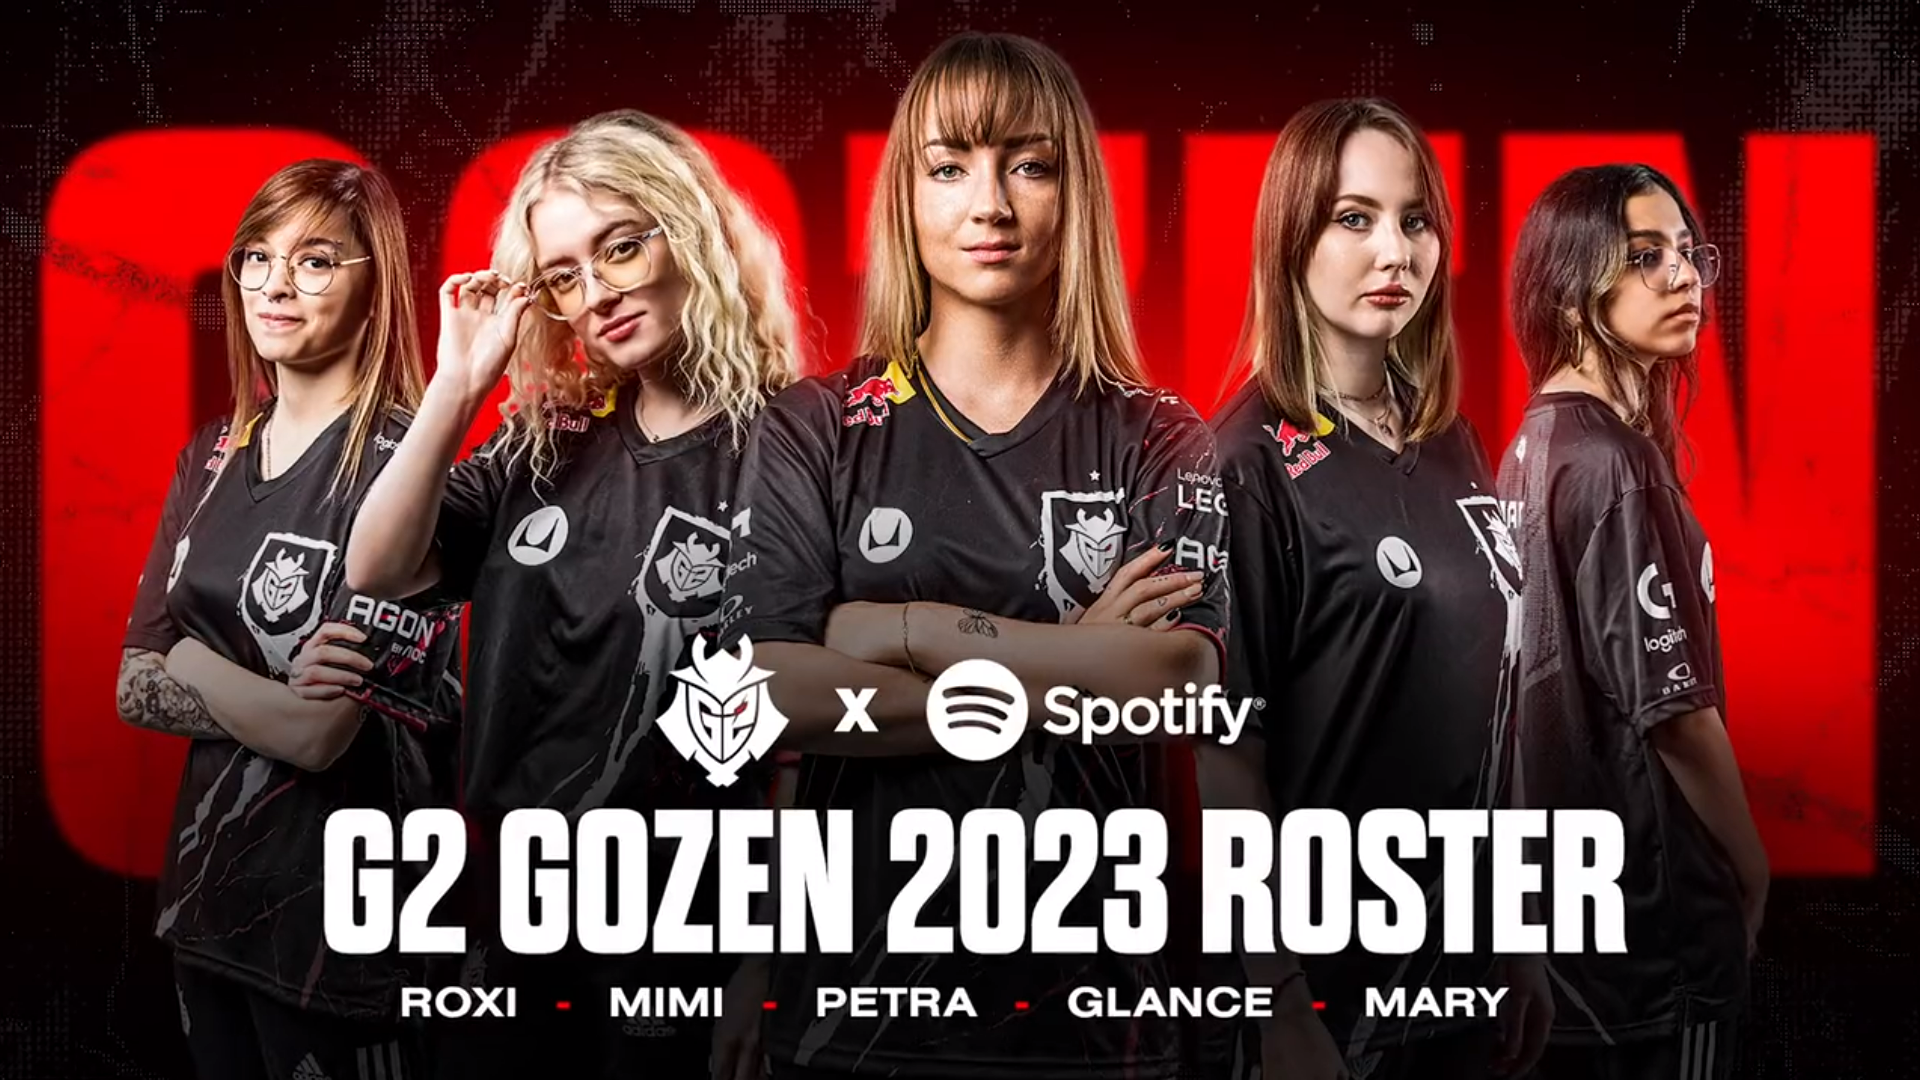 VCT 2022: Game Changers Championship becomes the most watched tournament in  female esports